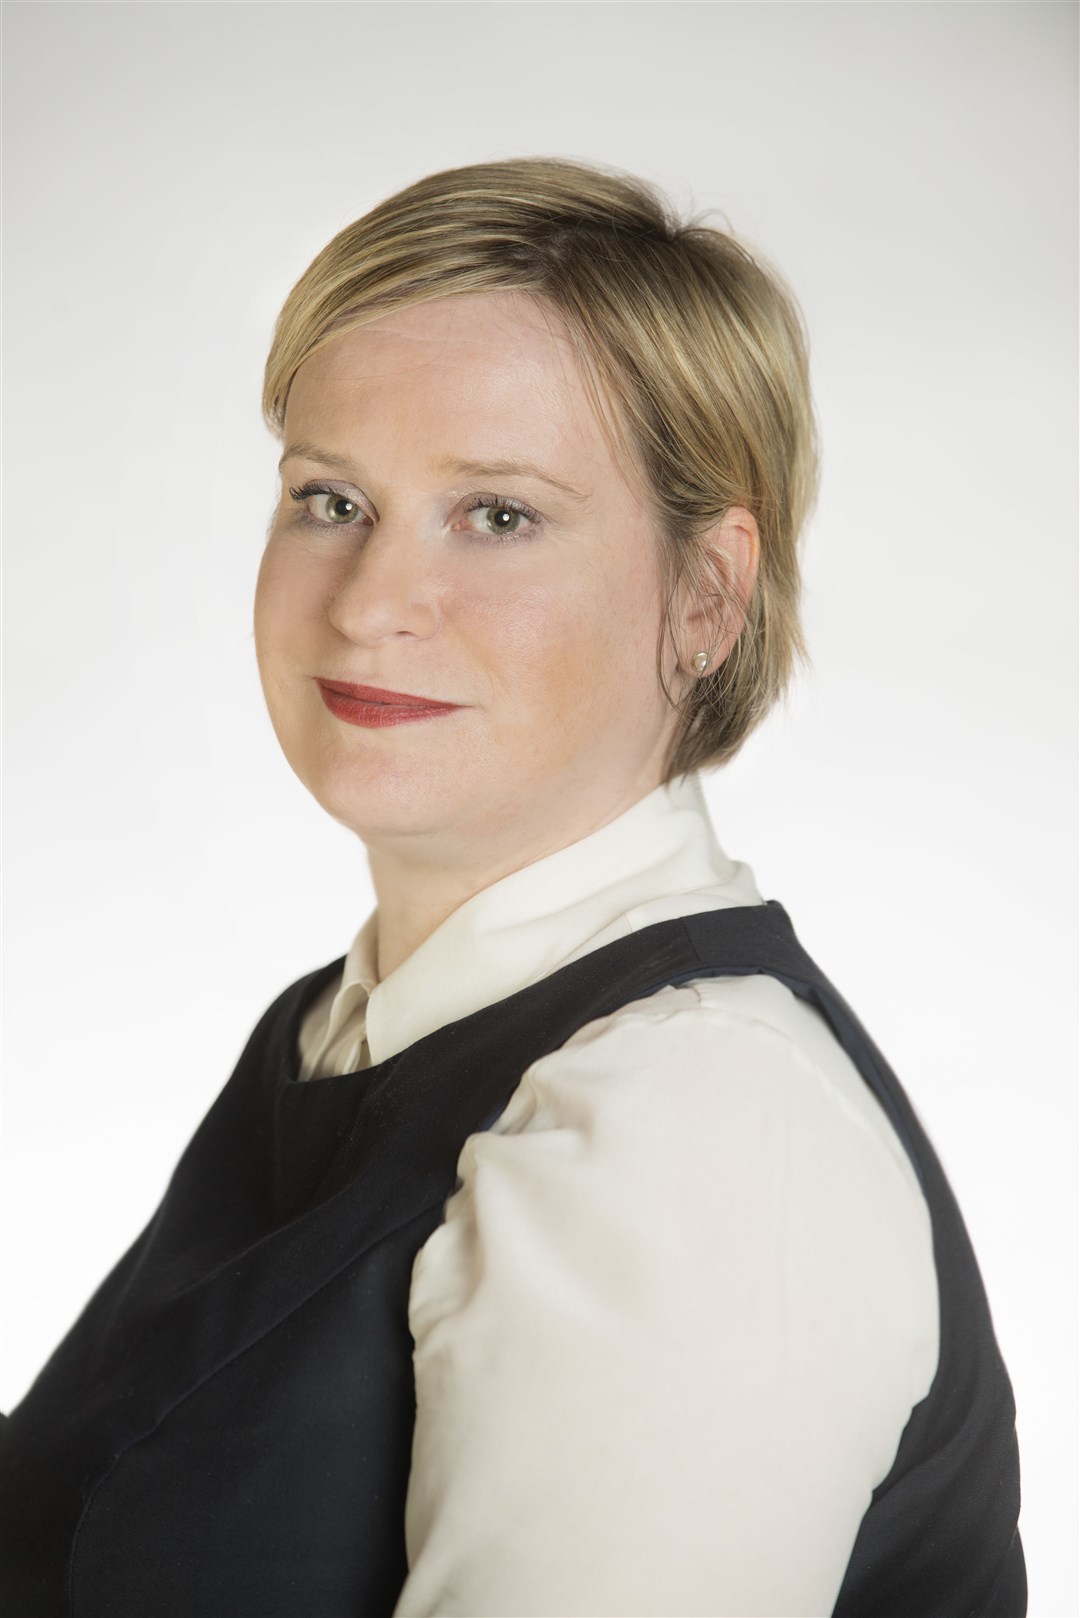 Amanda Masson – a partner in the family law team at Harper Macleod